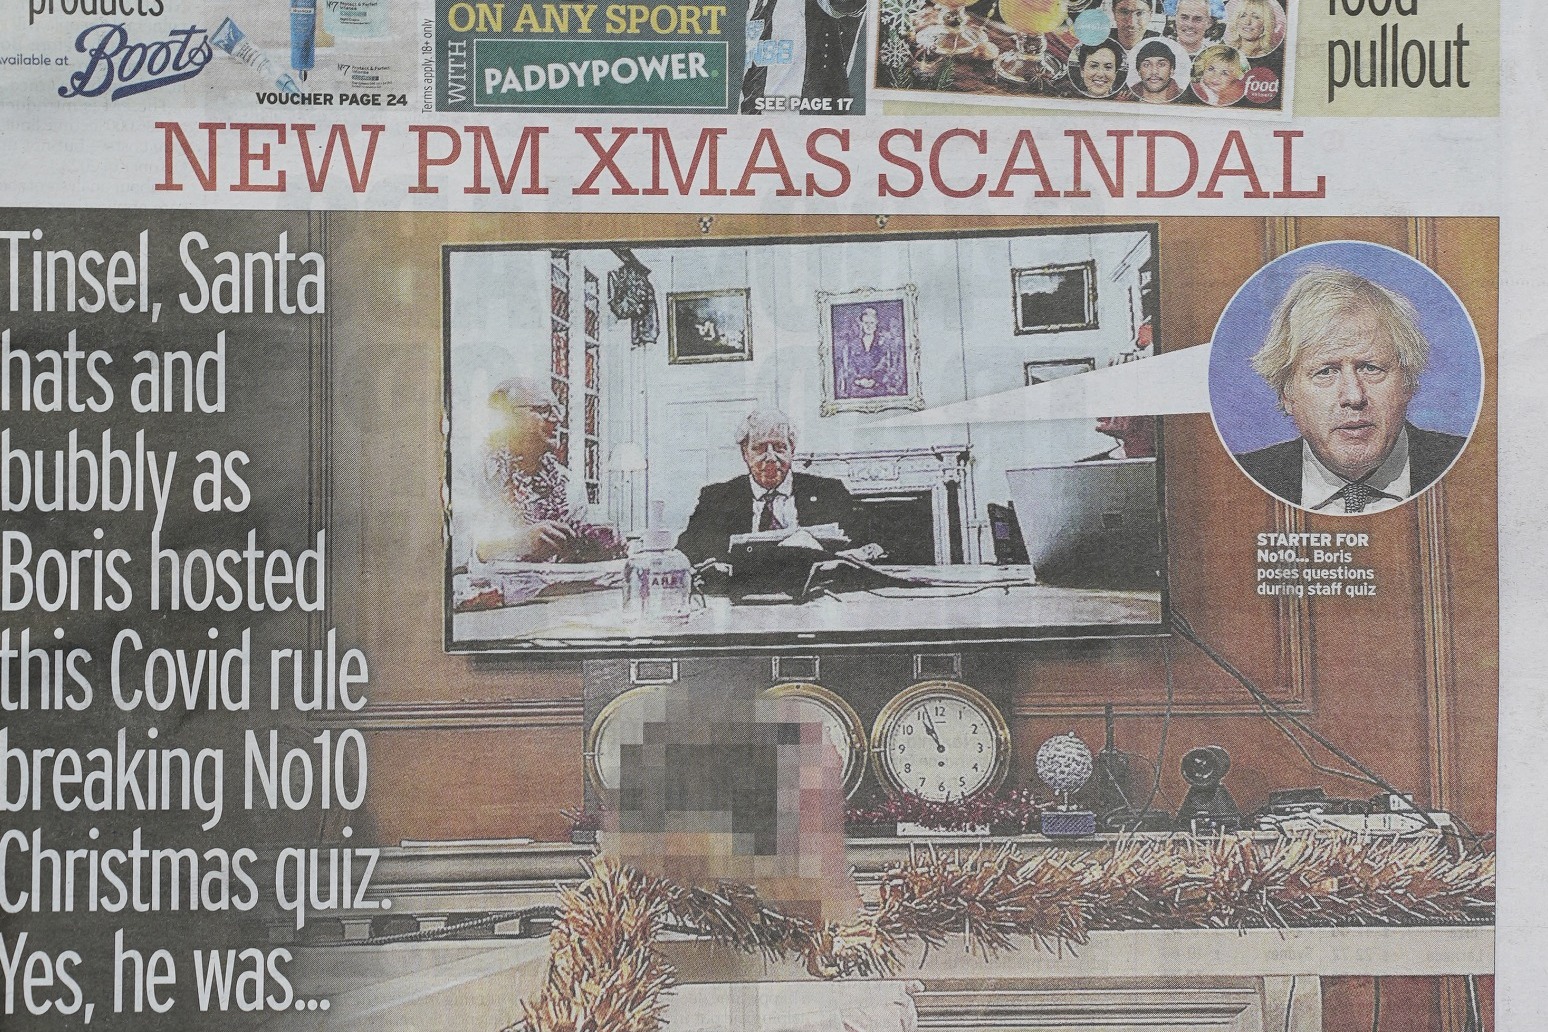 Keir Starmer: PM appears to have broken the law by taking part in festive quiz 